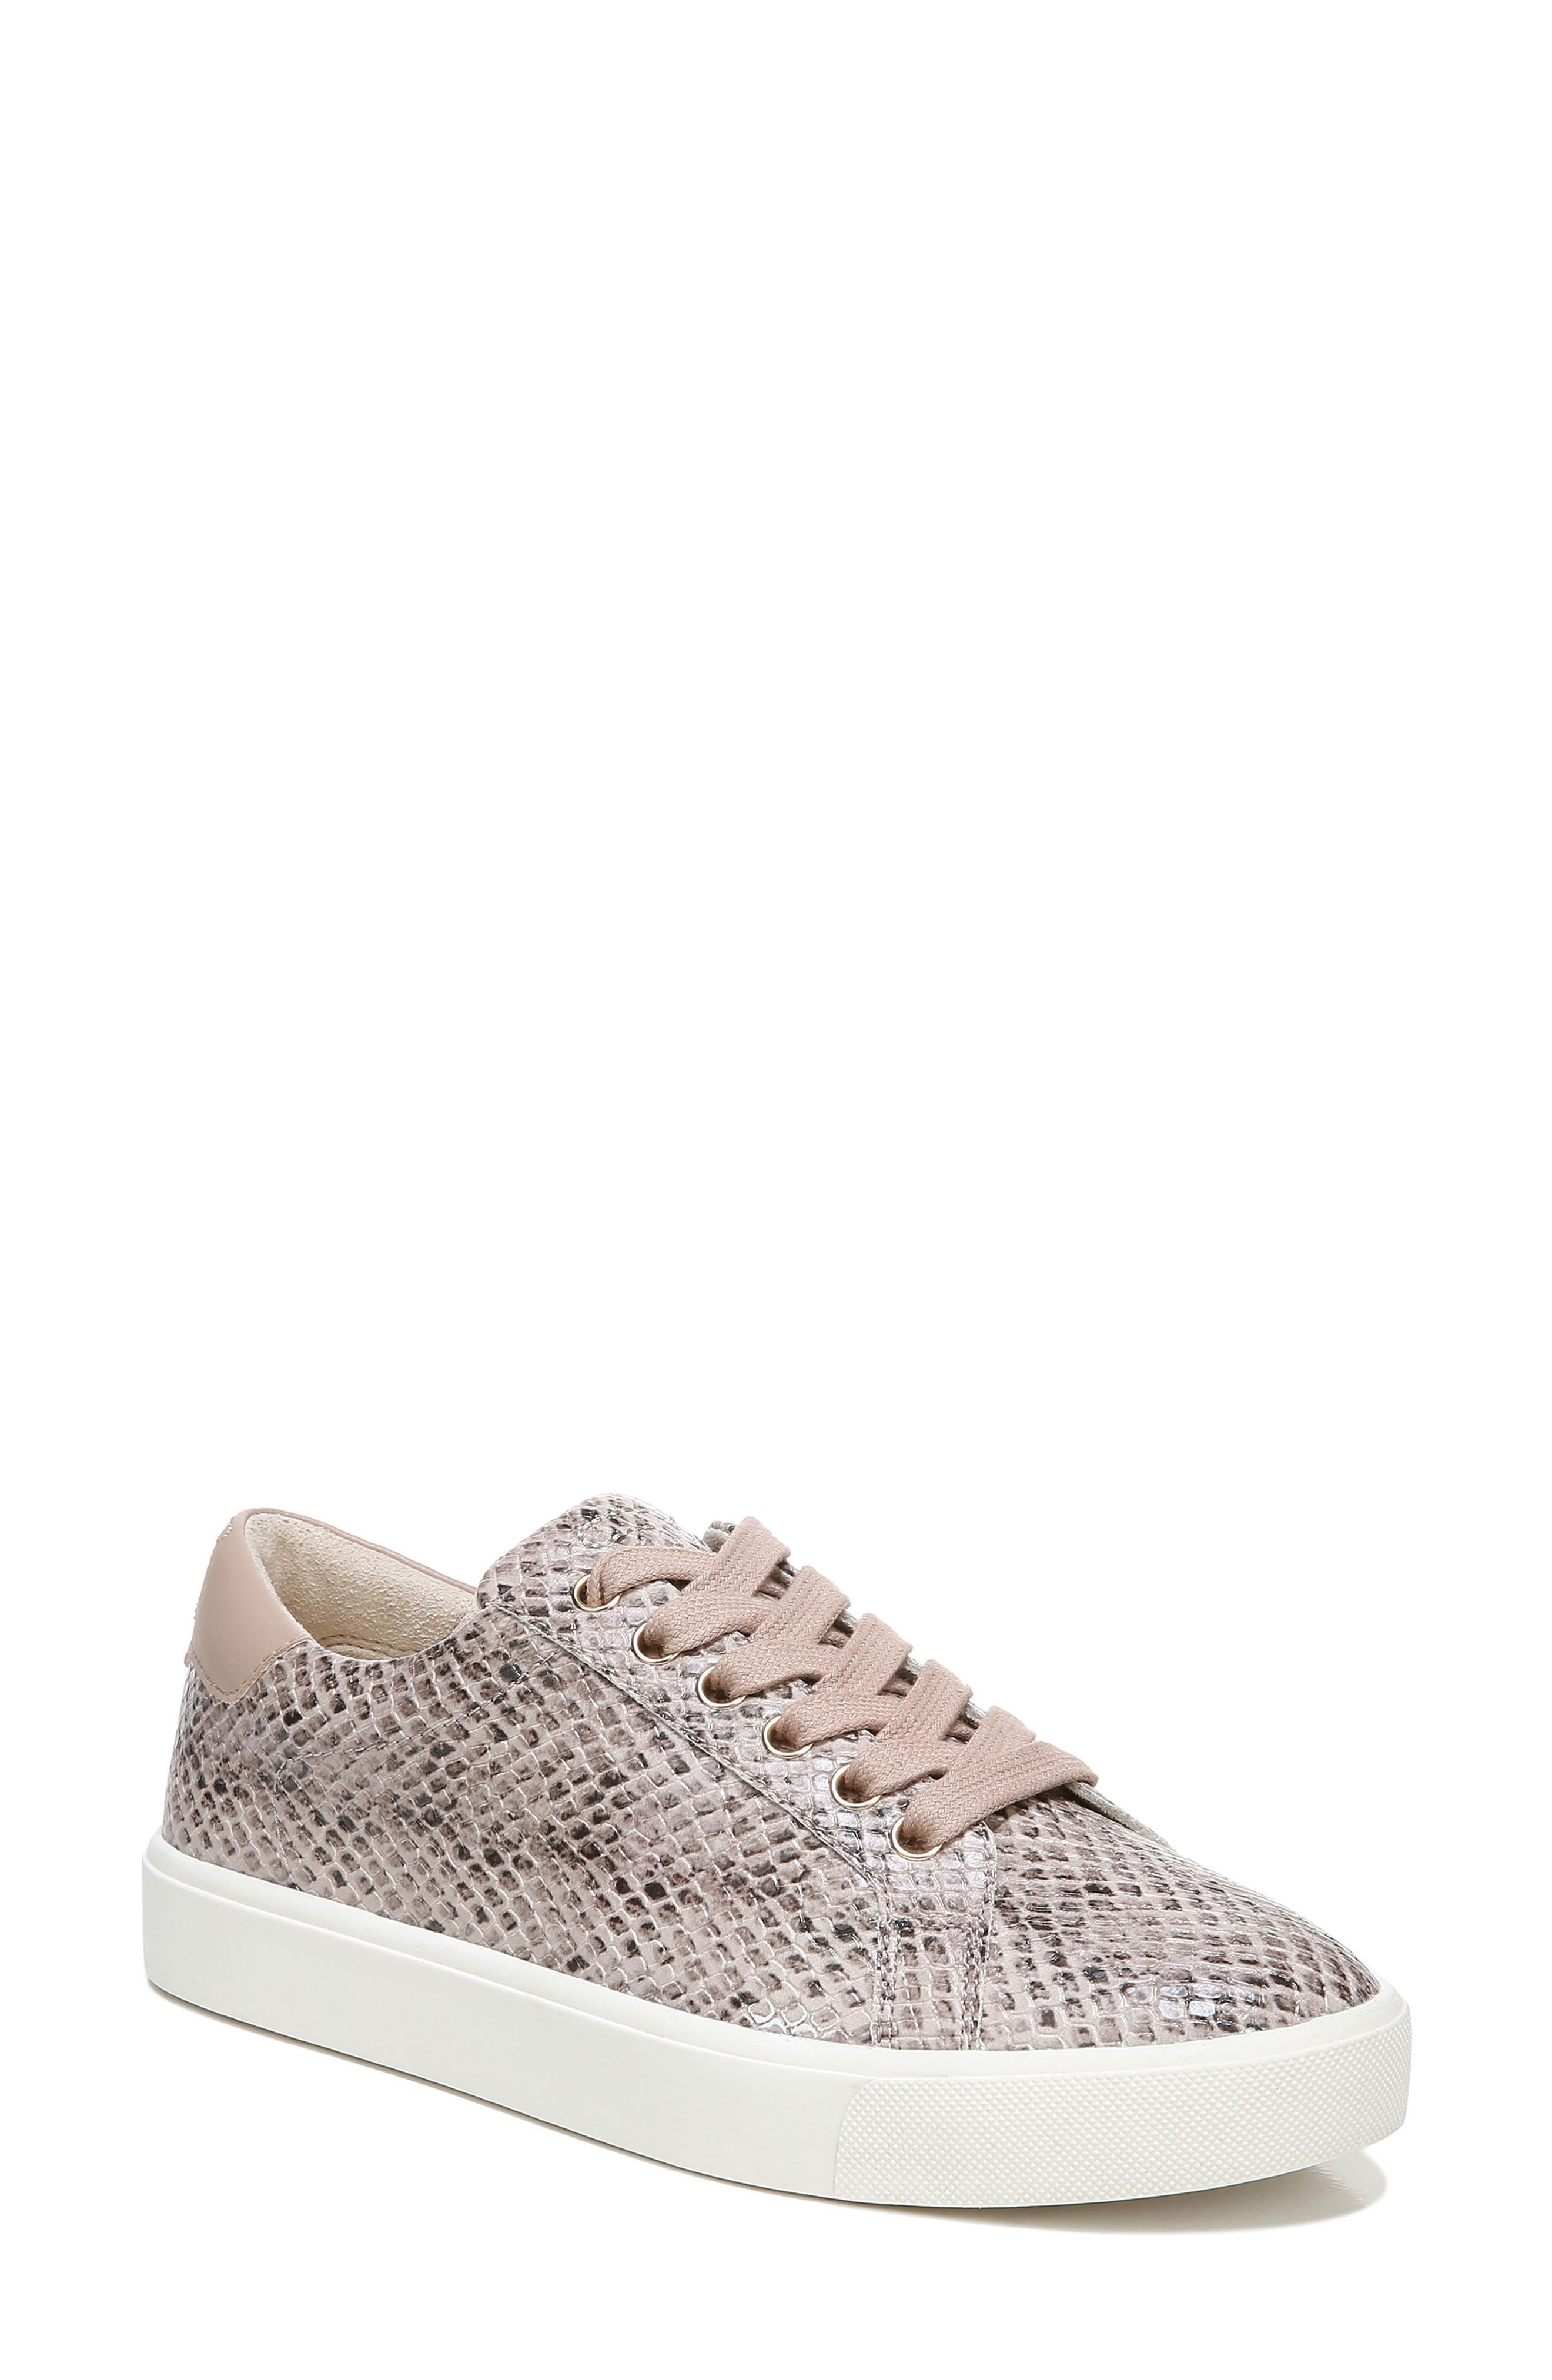 nordstrom womens tennis shoes